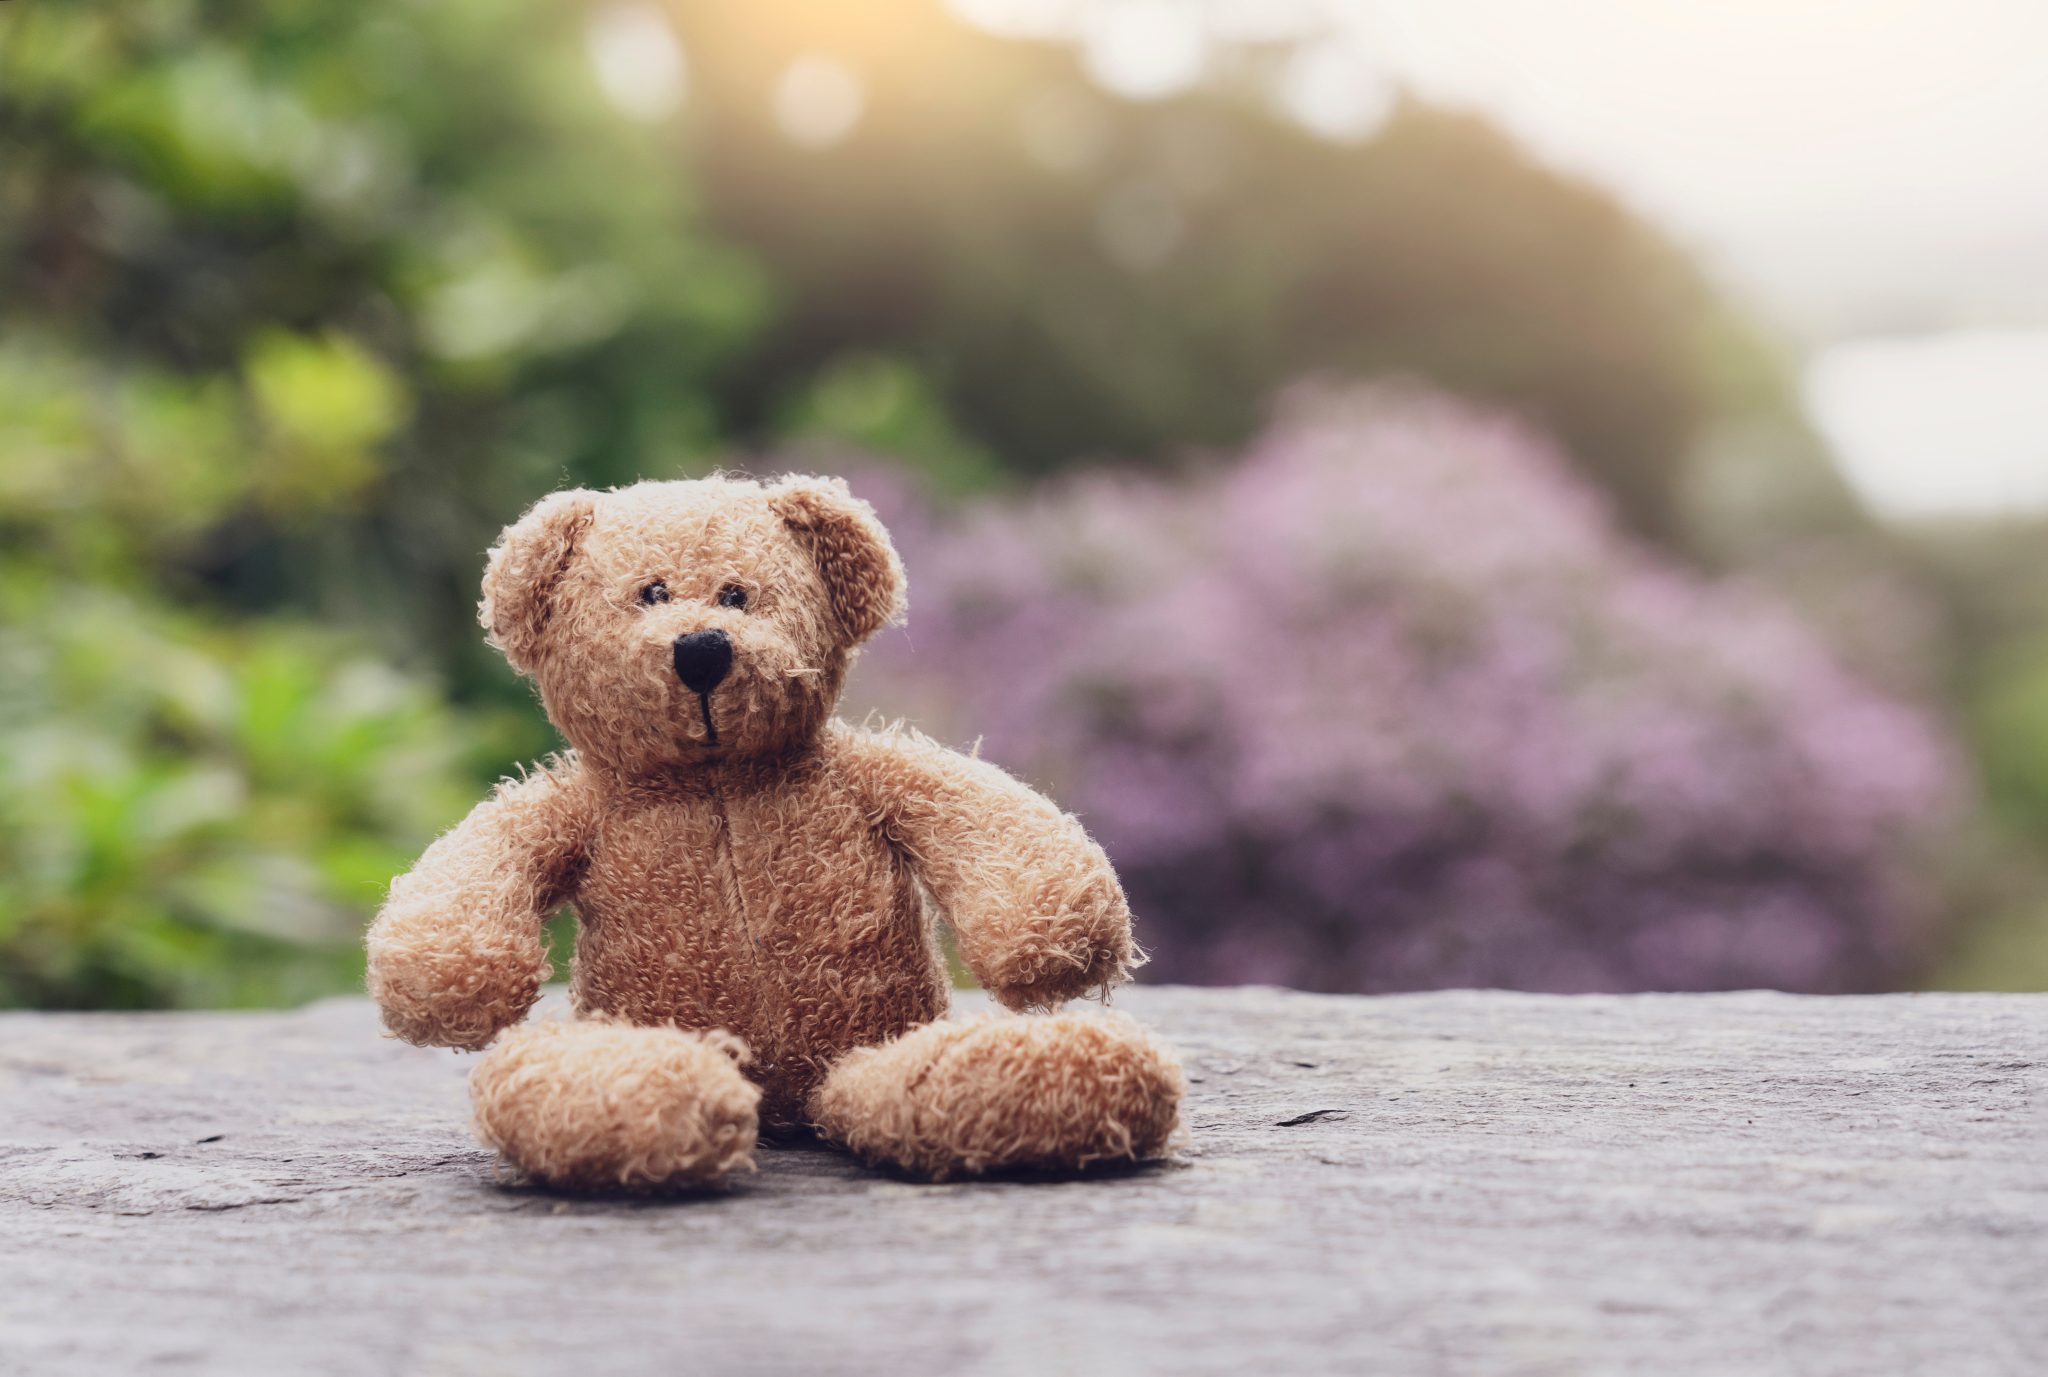 Teddy,Bear,Sitting,On,Footpath,With,Blurry,Natural,Background,